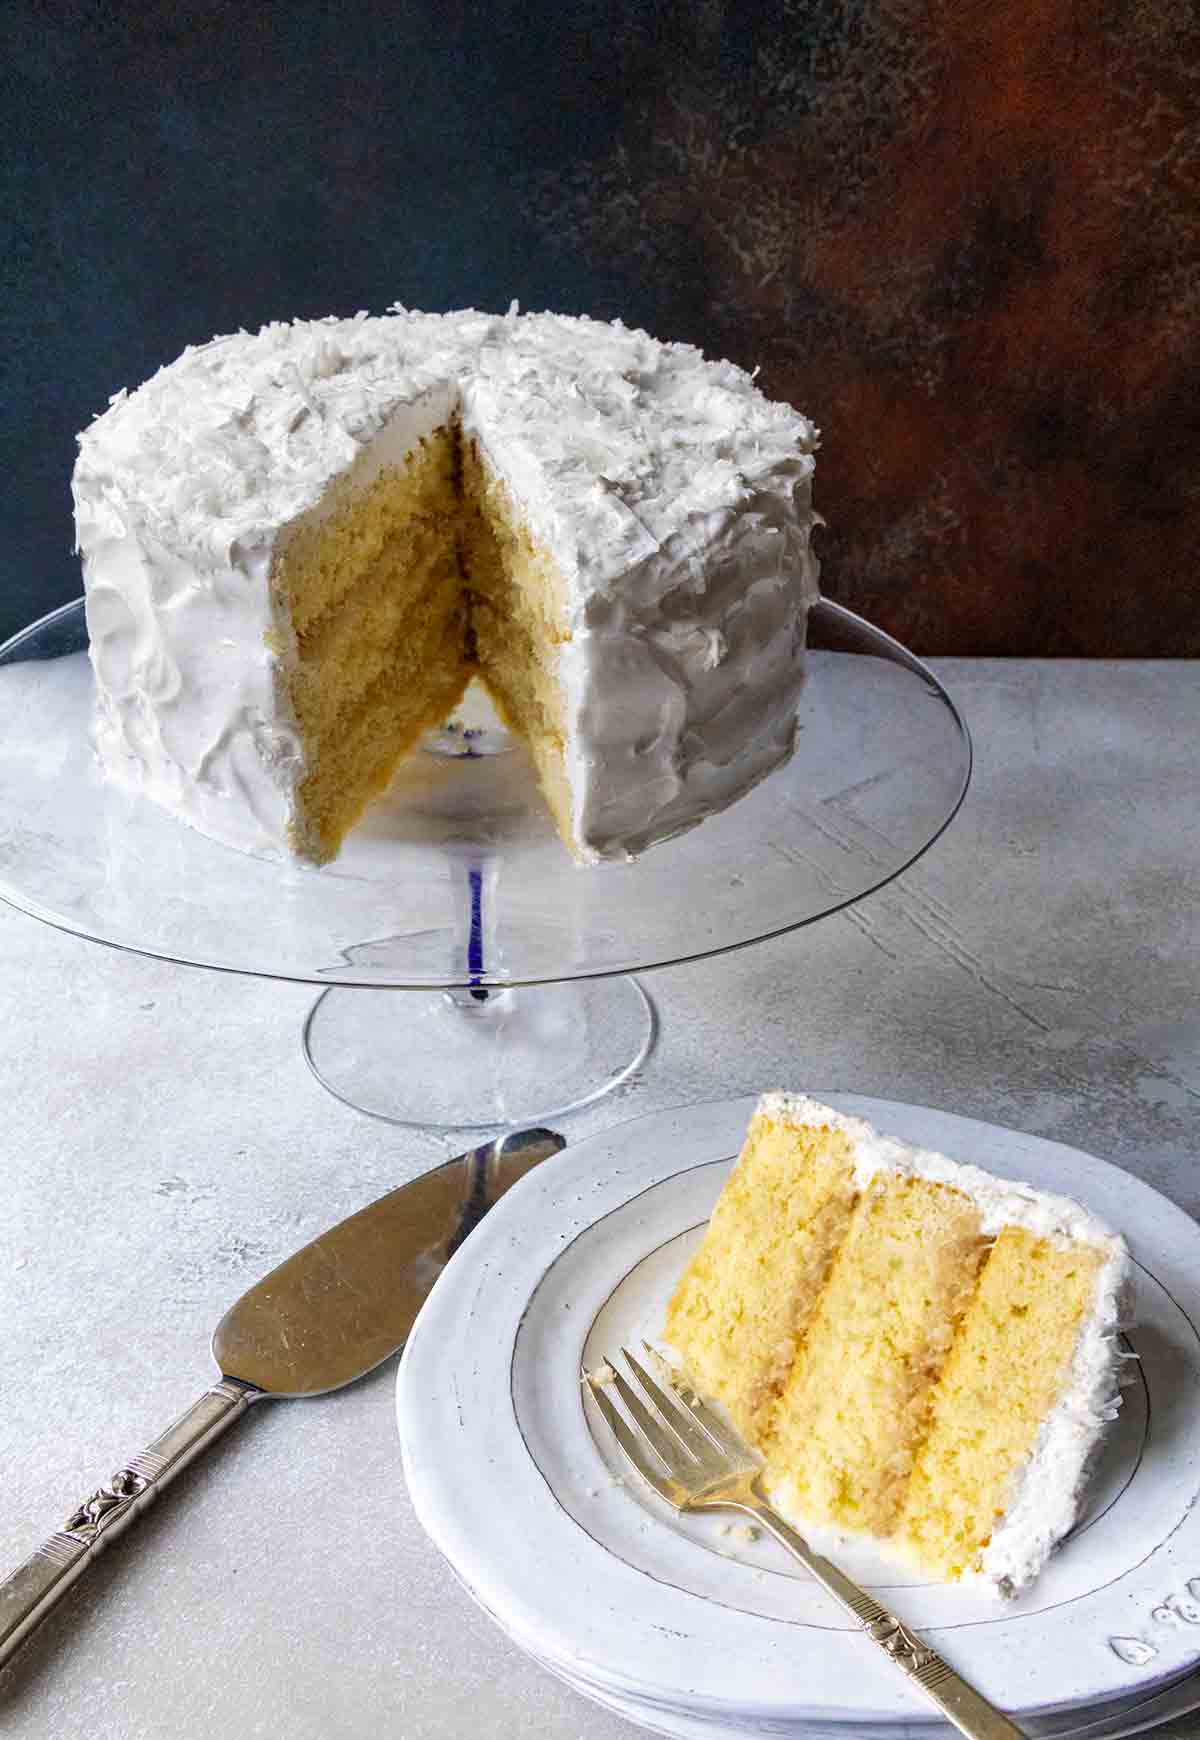 A white old-fashioned coconut cake with 7-minute frosting topped with shredded coconut on a glass cake stand. A slice in front.